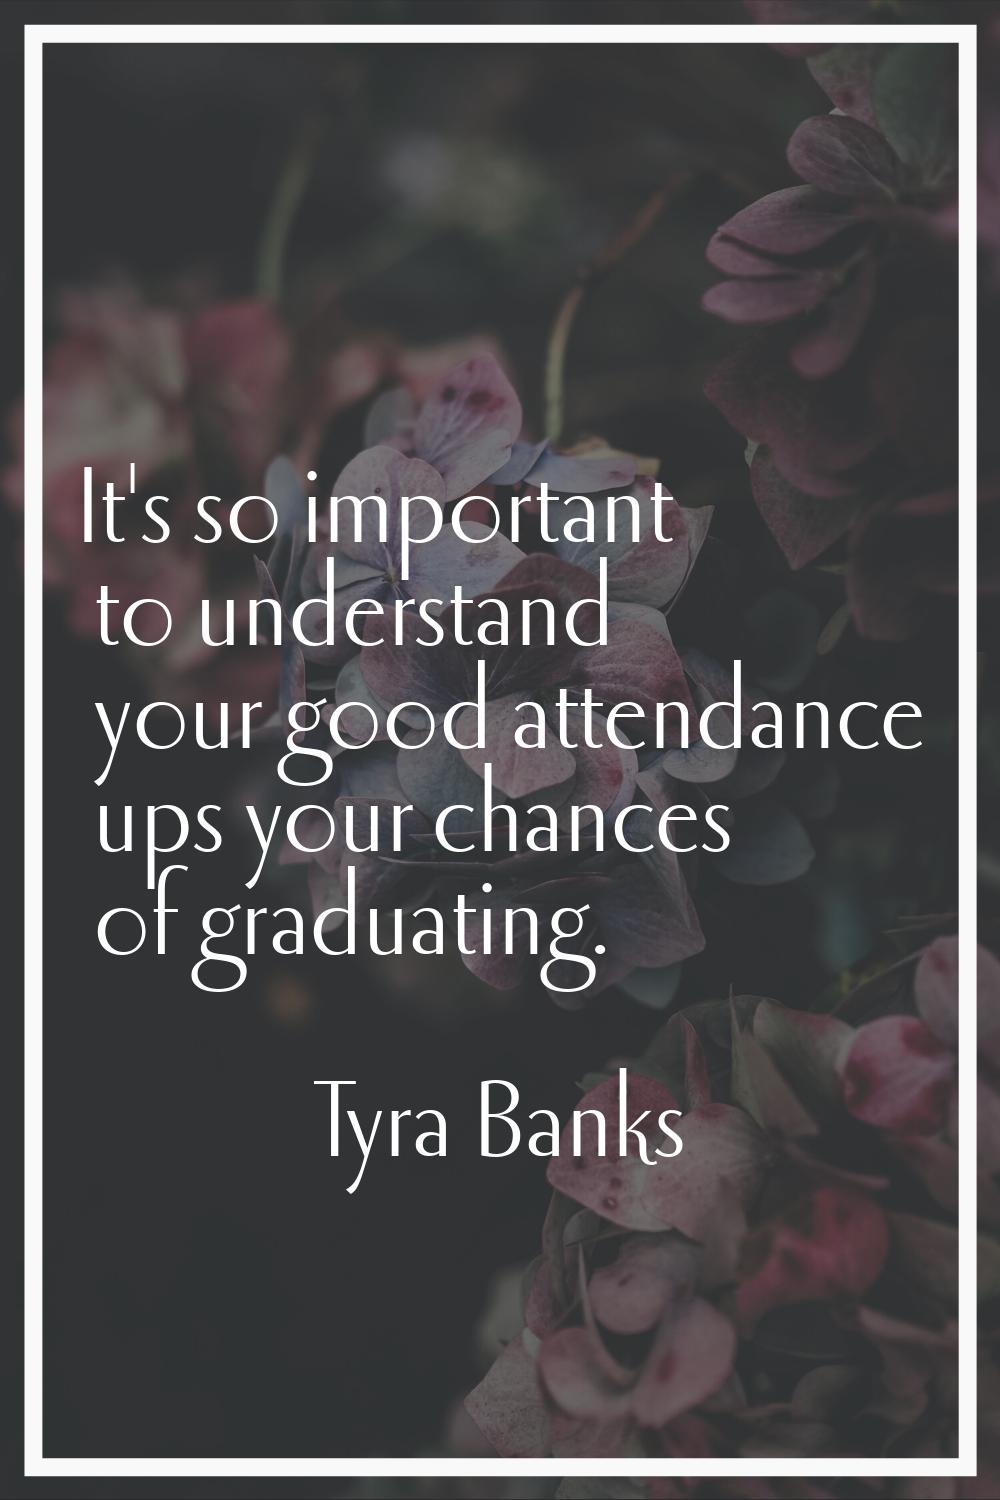 It's so important to understand your good attendance ups your chances of graduating.